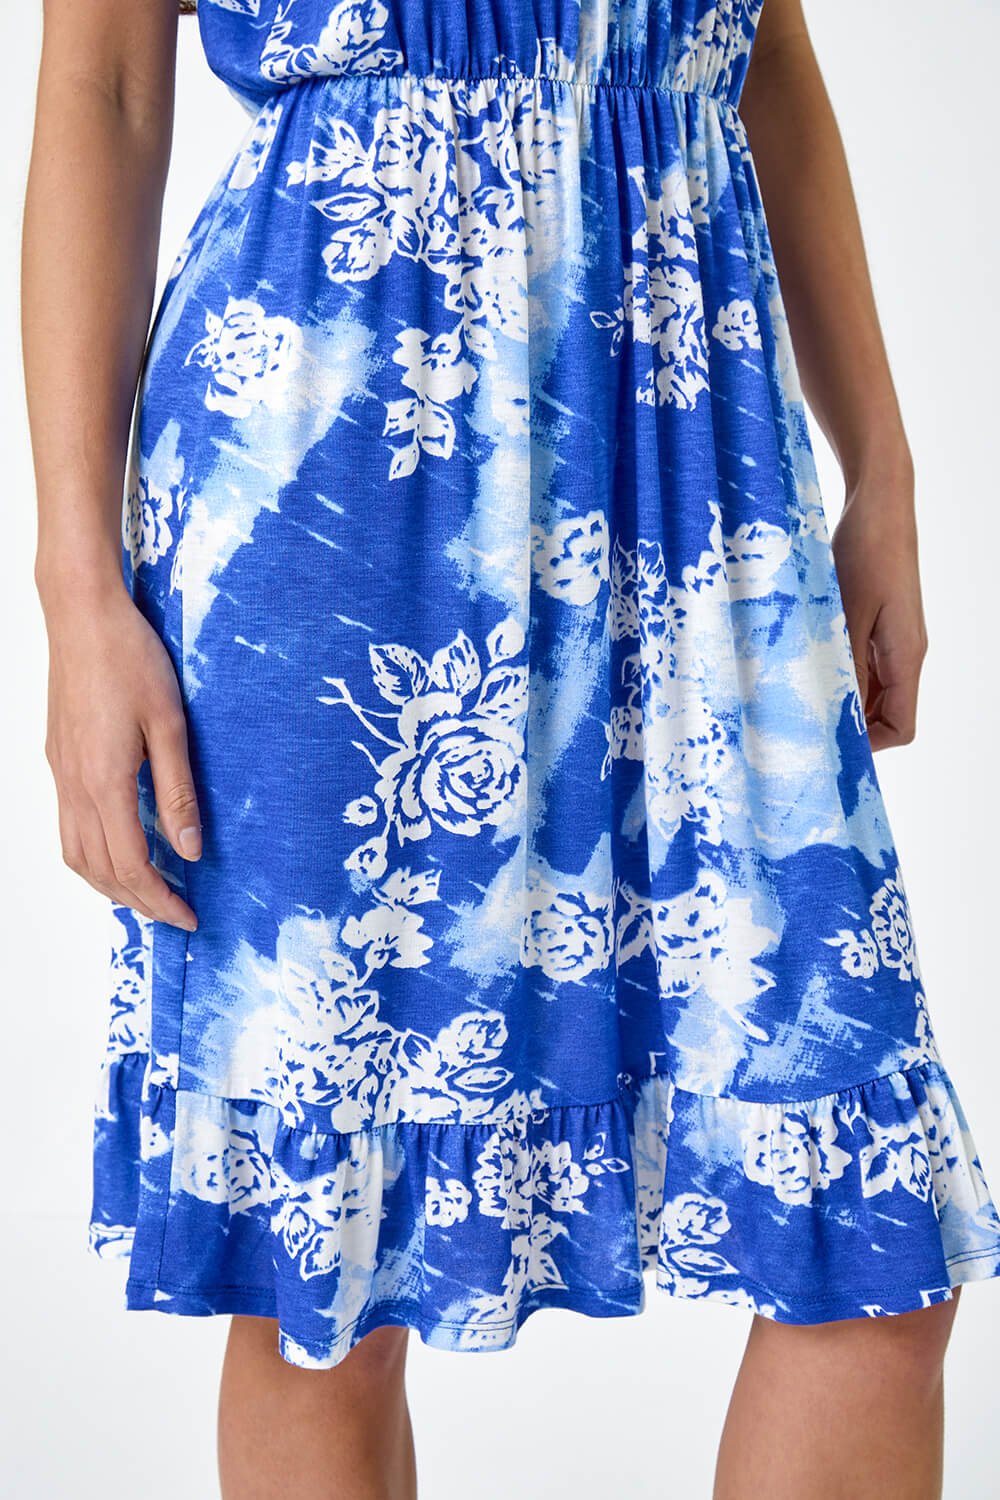 Blue Petite Abstract Floral Stretch Frill Dress, Image 5 of 5